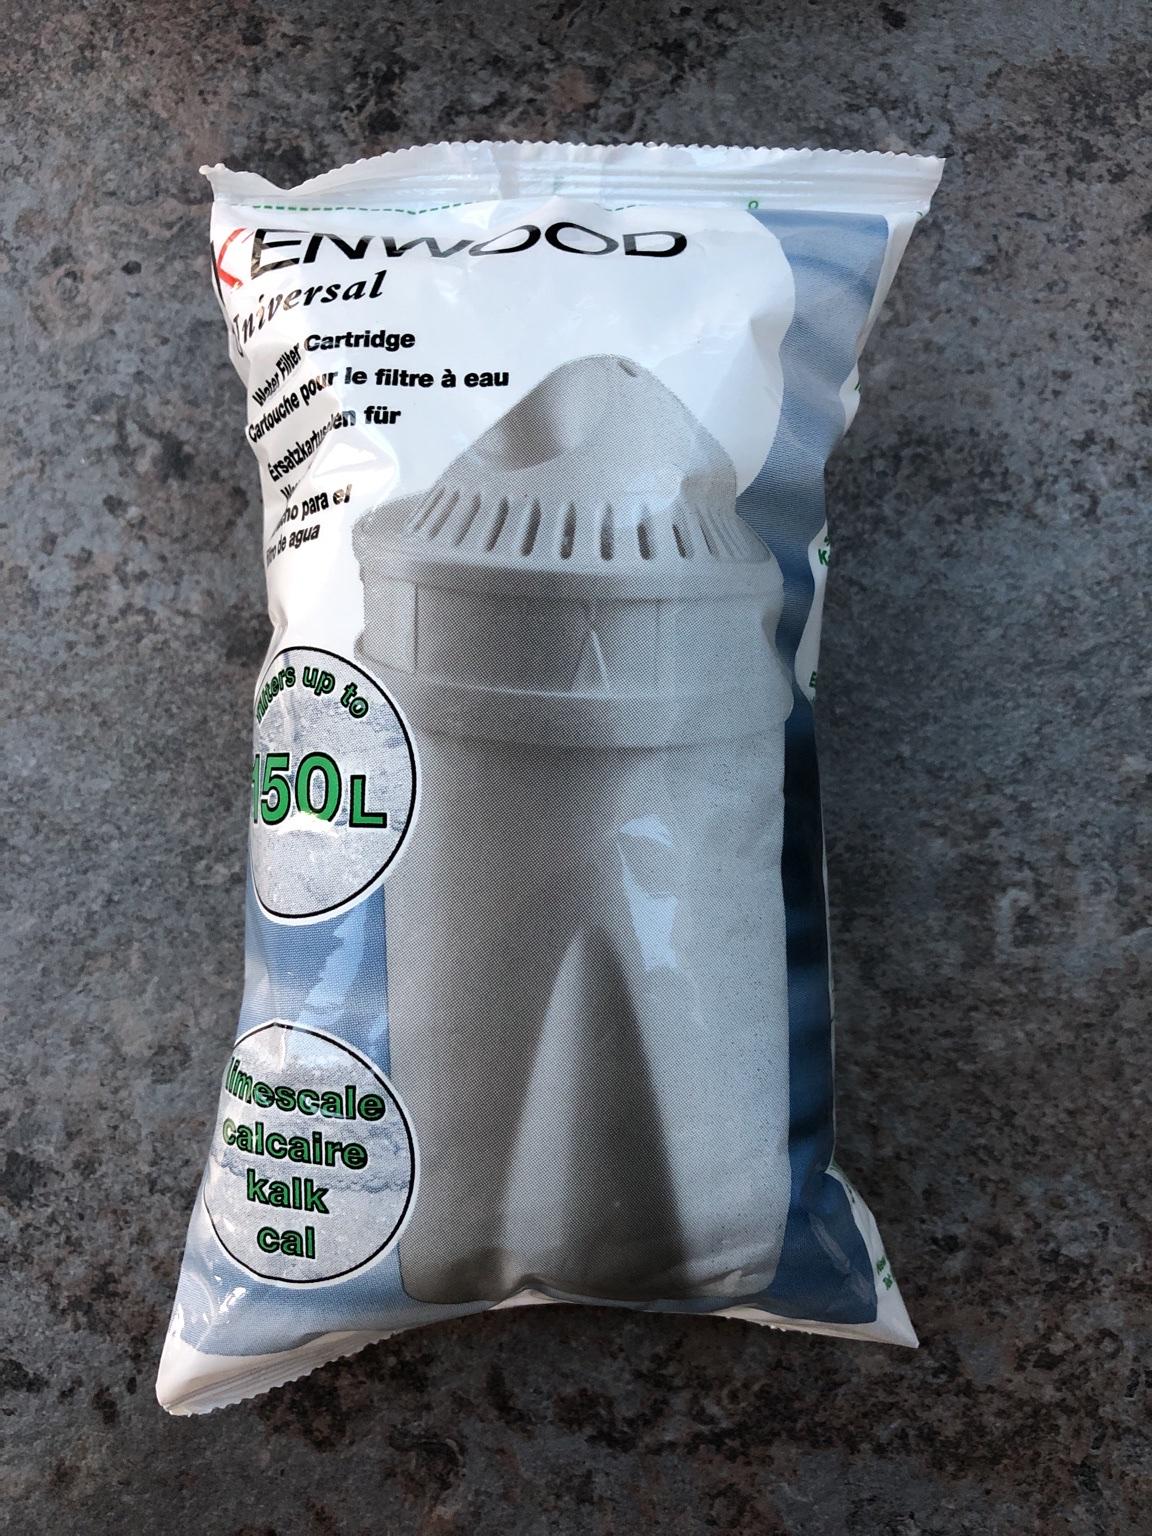 KENWOOD Universal Water Filter Cartridges in B91 Solihull for £1.00 for sale Shpock